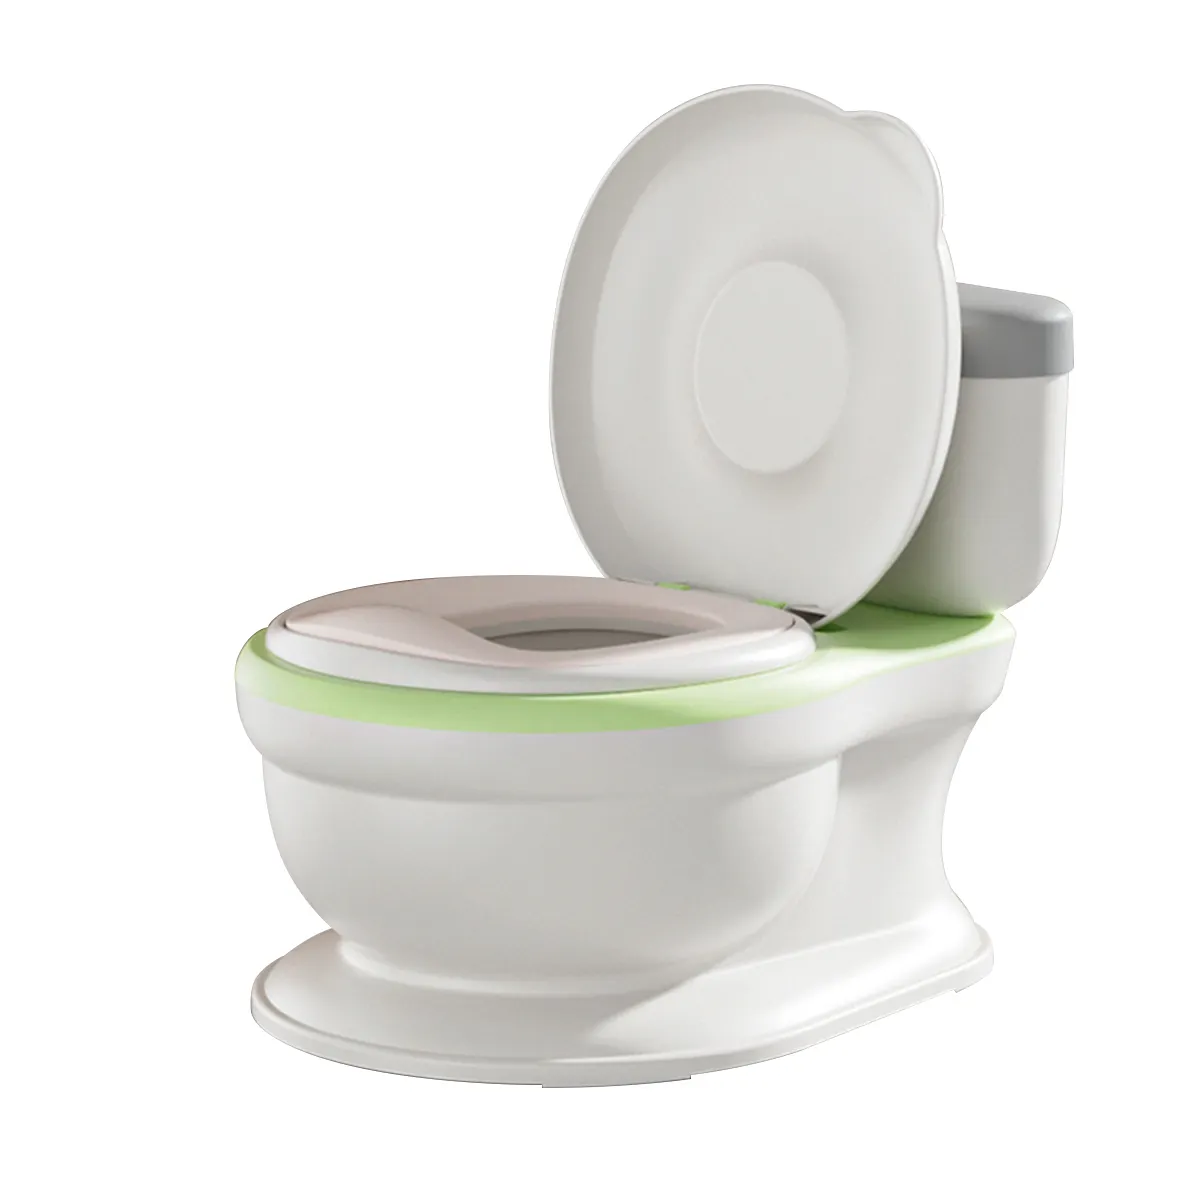 Simulation Baby Potty with Tissue Storage Box Realistic Potty Training Toilet Chair Looks and Feels Like an Adult Toilet Potty